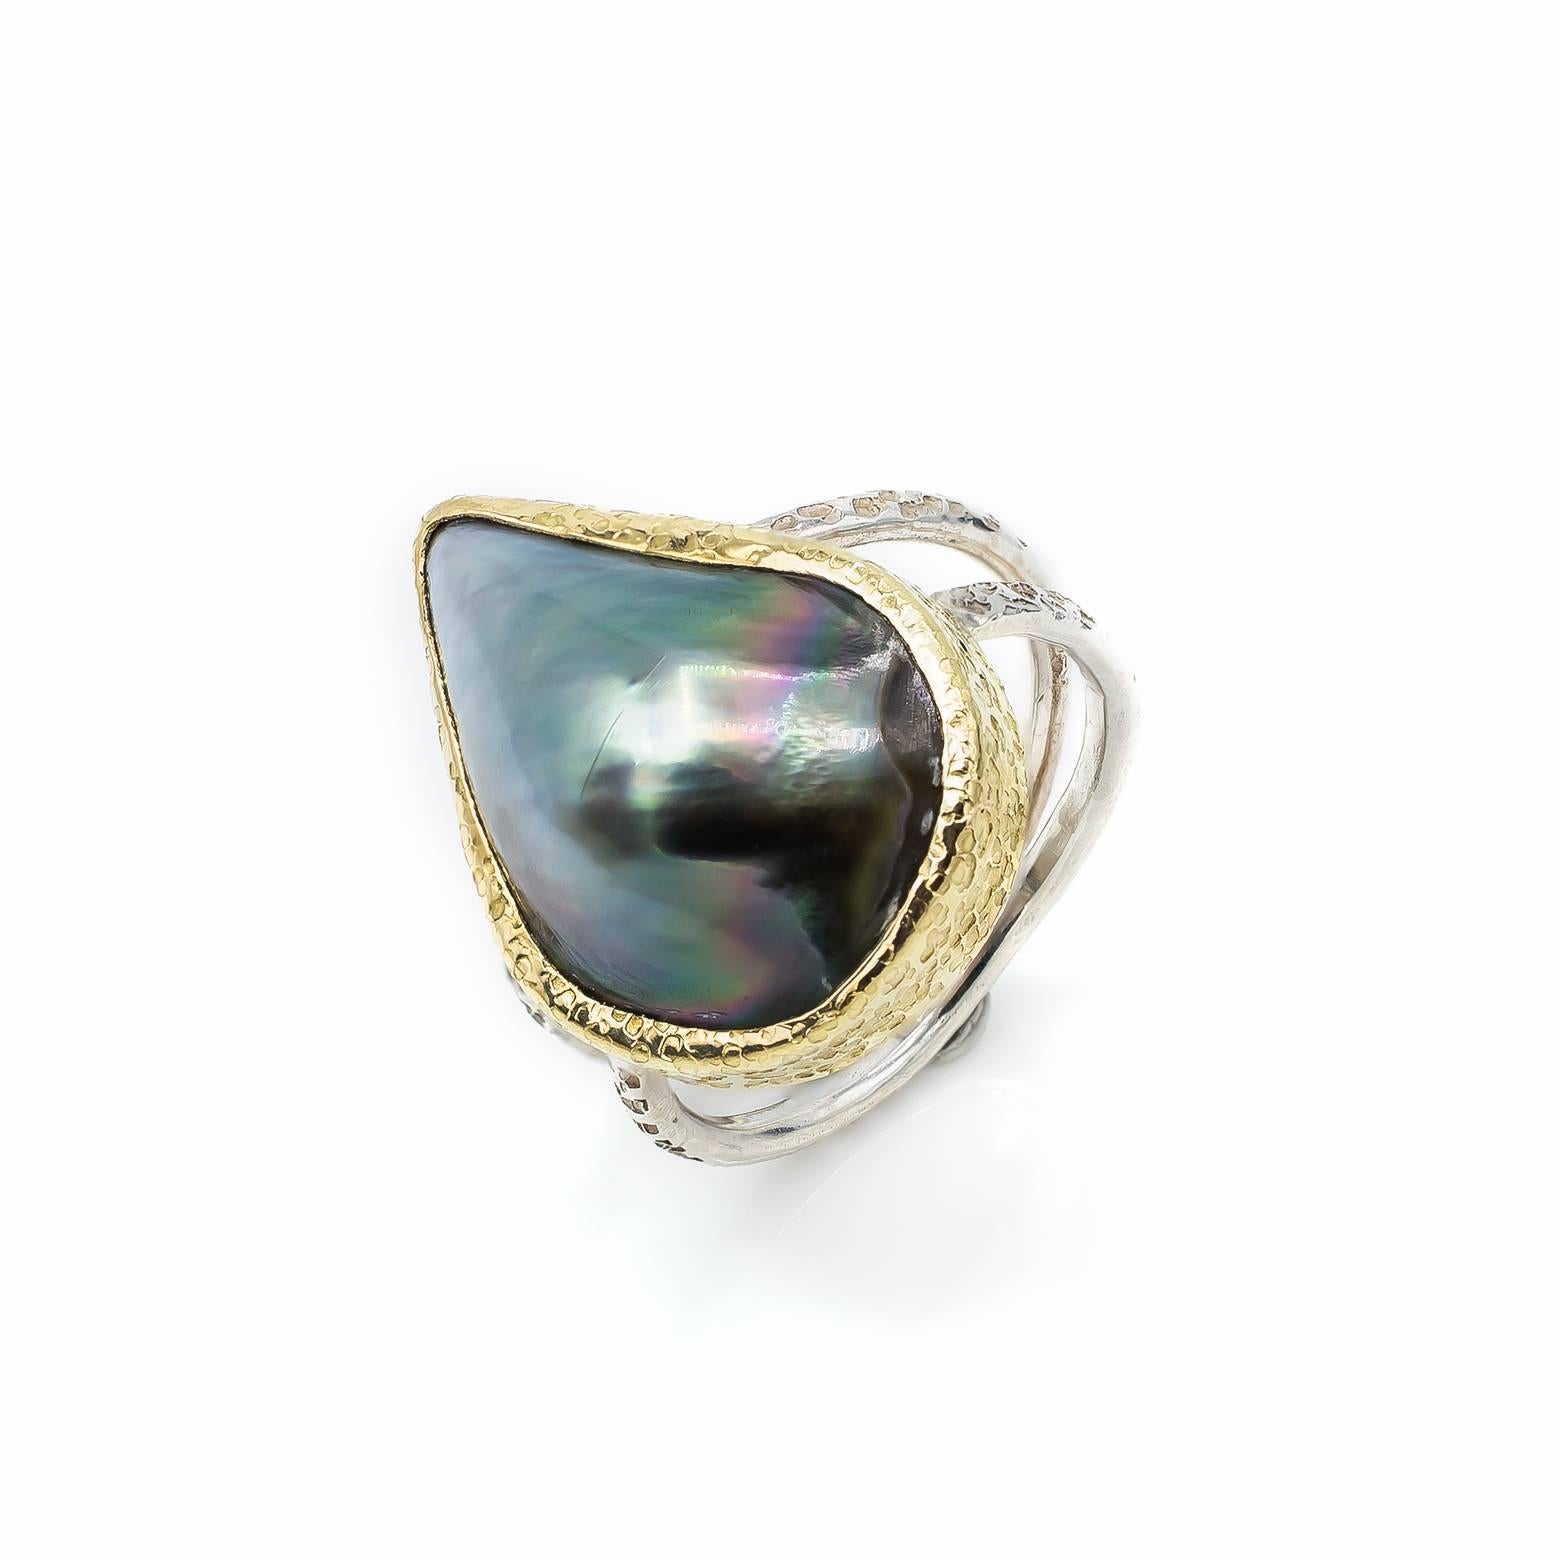 This stunning large black mabe pearl ring is naturally formed in a tear drop fashion from the black lipped oyster. With a slight gradient from the tip to the base this pearl glows in a brilliant silver color with a textured, hammered, 14K yellow